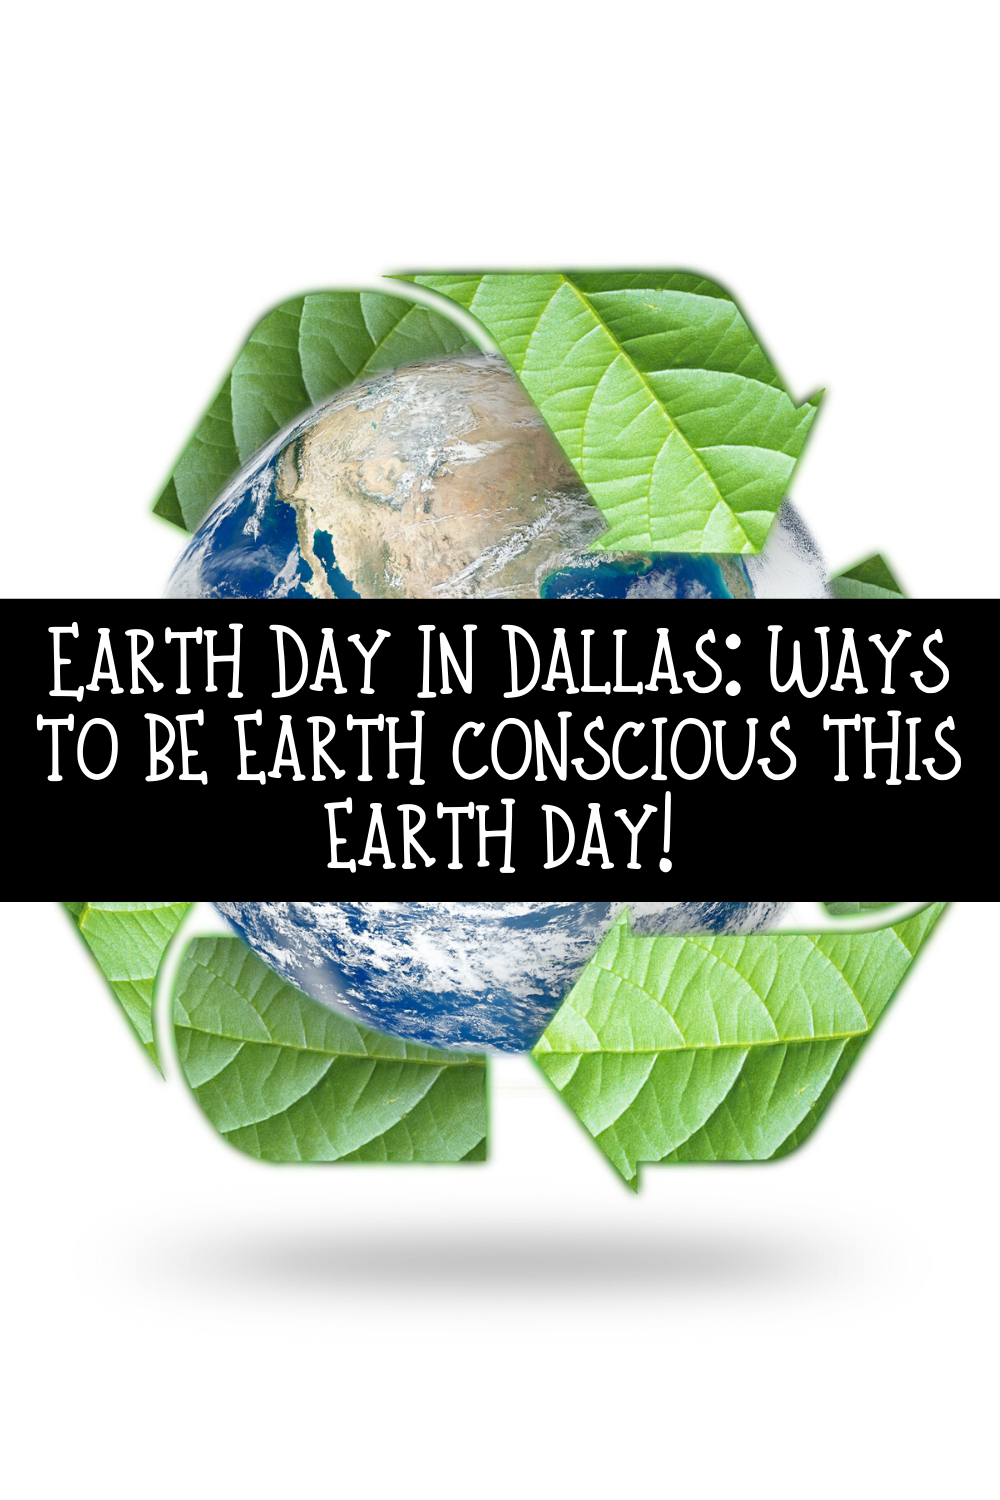 Did you know that Earth Day in Dallas is right around the corner? If you can't volunteer in Dallas for earth day this year, don't worry, we have five easy ways you can make a difference...a BIG difference without ever leaving your home! 